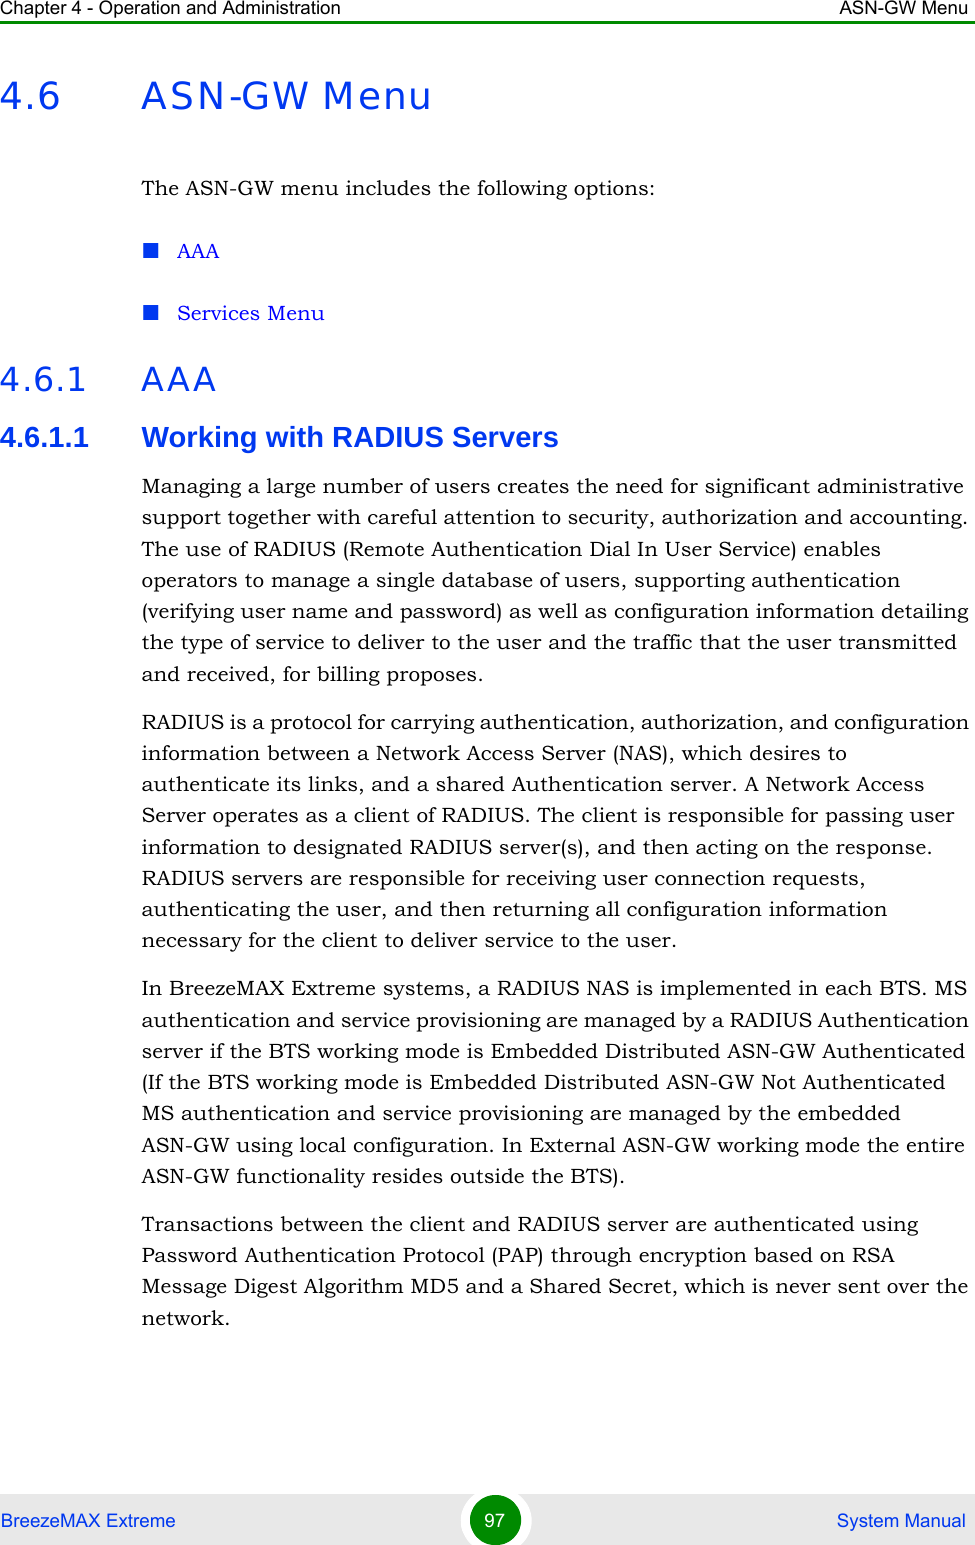 Chapter 4 - Operation and Administration ASN-GW MenuBreezeMAX Extreme 97  System Manual4.6 ASN-GW MenuThe ASN-GW menu includes the following options:AAAServices Menu4.6.1 AAA4.6.1.1 Working with RADIUS ServersManaging a large number of users creates the need for significant administrative support together with careful attention to security, authorization and accounting. The use of RADIUS (Remote Authentication Dial In User Service) enables operators to manage a single database of users, supporting authentication (verifying user name and password) as well as configuration information detailing the type of service to deliver to the user and the traffic that the user transmitted and received, for billing proposes.RADIUS is a protocol for carrying authentication, authorization, and configuration information between a Network Access Server (NAS), which desires to authenticate its links, and a shared Authentication server. A Network Access Server operates as a client of RADIUS. The client is responsible for passing user information to designated RADIUS server(s), and then acting on the response. RADIUS servers are responsible for receiving user connection requests, authenticating the user, and then returning all configuration information necessary for the client to deliver service to the user. In BreezeMAX Extreme systems, a RADIUS NAS is implemented in each BTS. MS authentication and service provisioning are managed by a RADIUS Authentication server if the BTS working mode is Embedded Distributed ASN-GW Authenticated (If the BTS working mode is Embedded Distributed ASN-GW Not Authenticated MS authentication and service provisioning are managed by the embedded ASN-GW using local configuration. In External ASN-GW working mode the entire ASN-GW functionality resides outside the BTS).Transactions between the client and RADIUS server are authenticated using Password Authentication Protocol (PAP) through encryption based on RSA Message Digest Algorithm MD5 and a Shared Secret, which is never sent over the network.